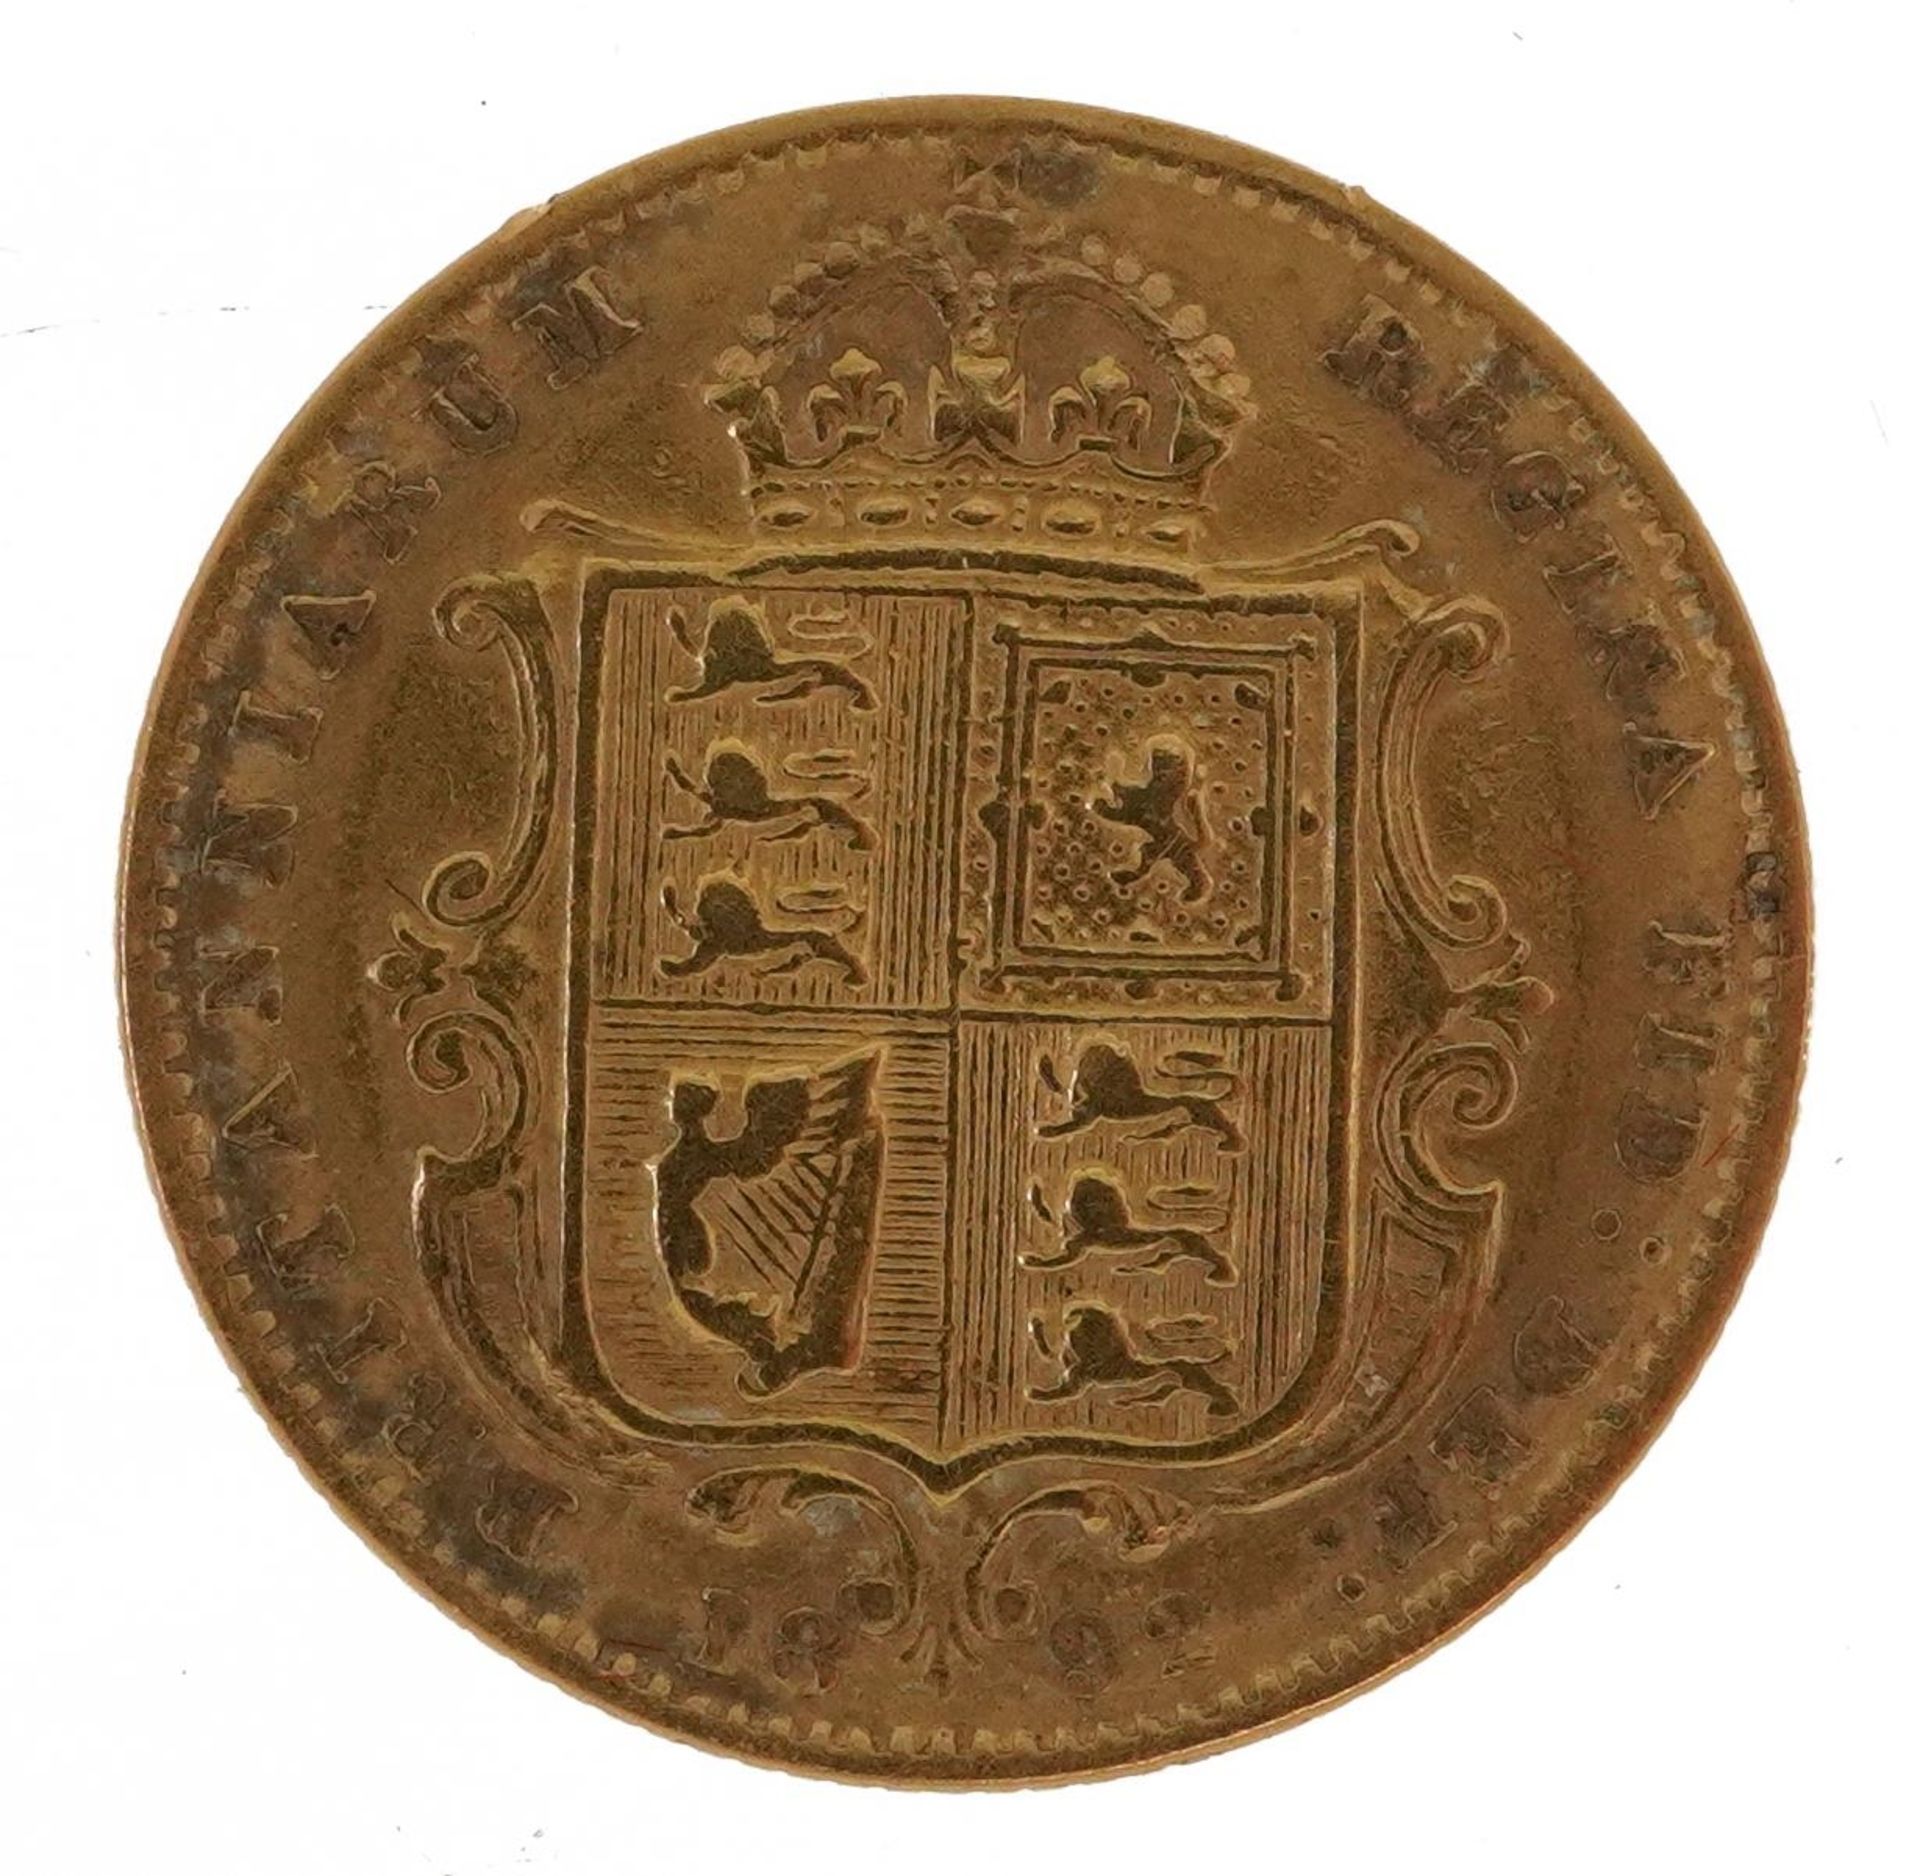 Queen Victoria 1892 shield back gold half sovereign : For further information on this lot please